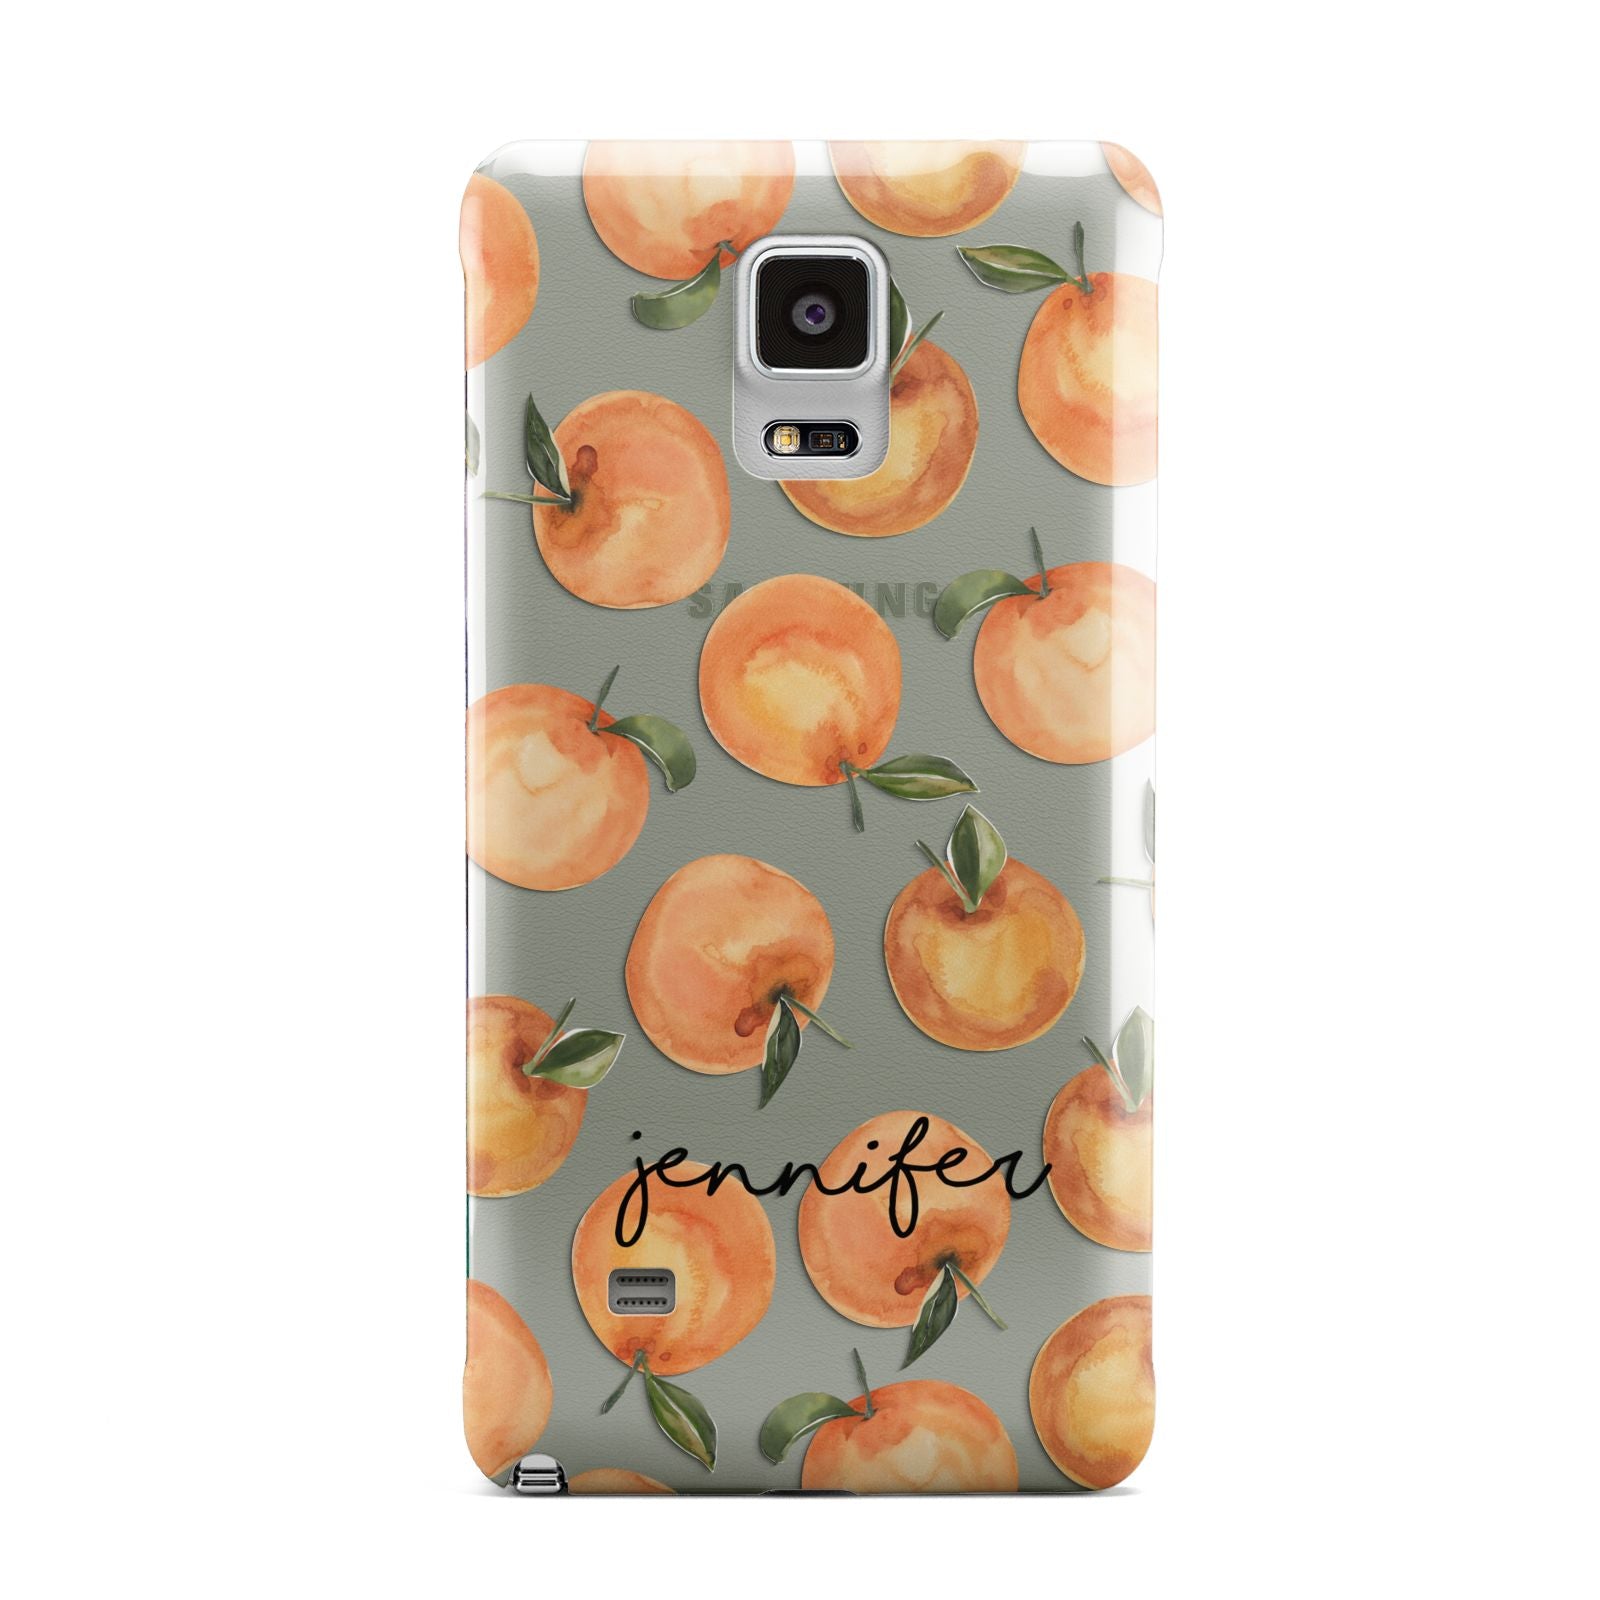 Personalised Oranges Name Samsung Galaxy Note 4 Case